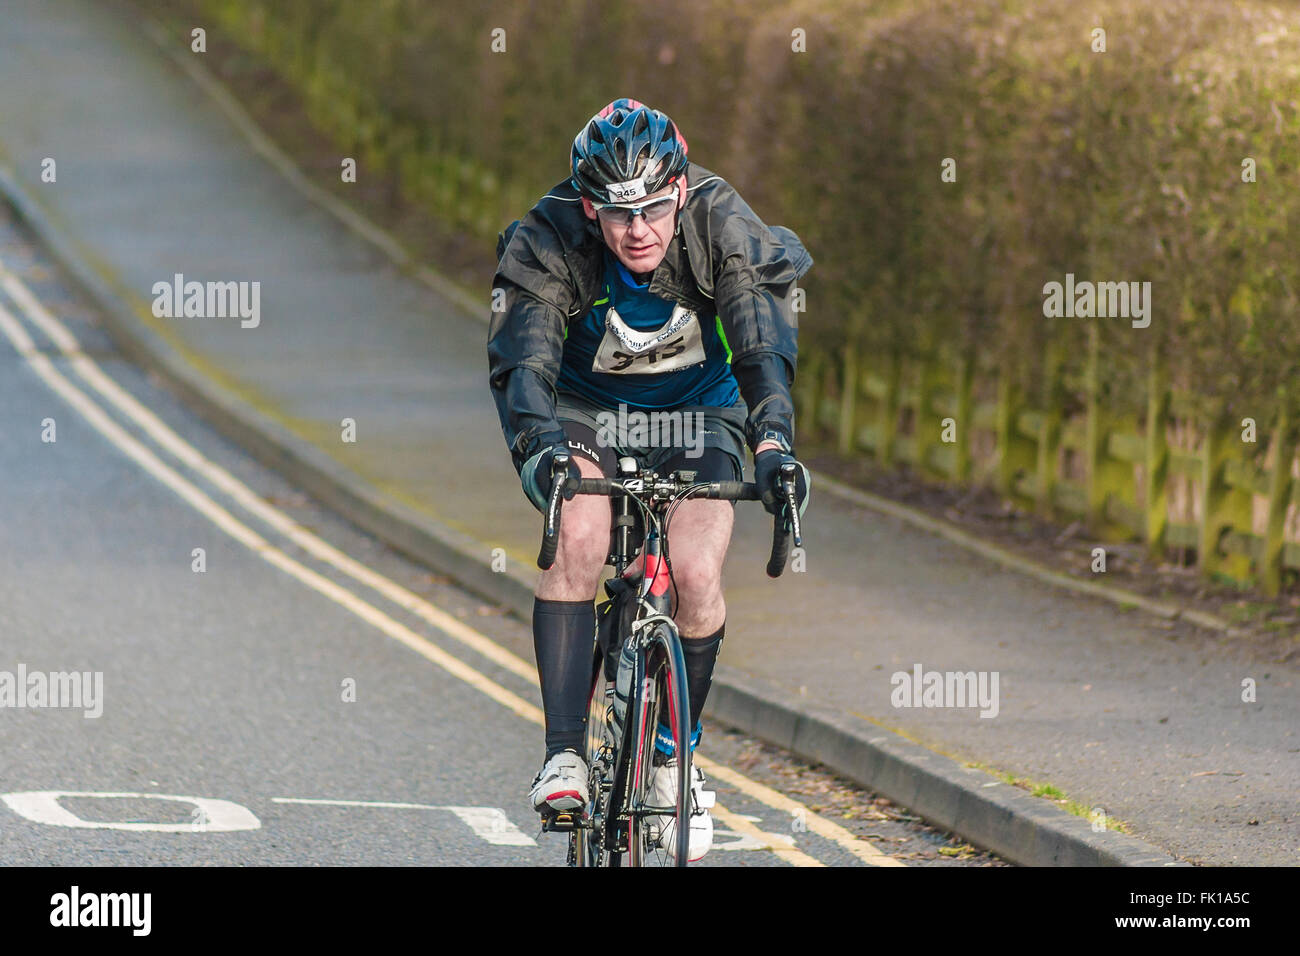 Whitwell, Rutland, UK. 5th March 2016. Cyclists competing in the 'Bike' section of the Dambuster Duathlon, a qualification event for the Duathlon World Championships 2016 Credit:  Jim Harrison/Alamy Live News Stock Photo